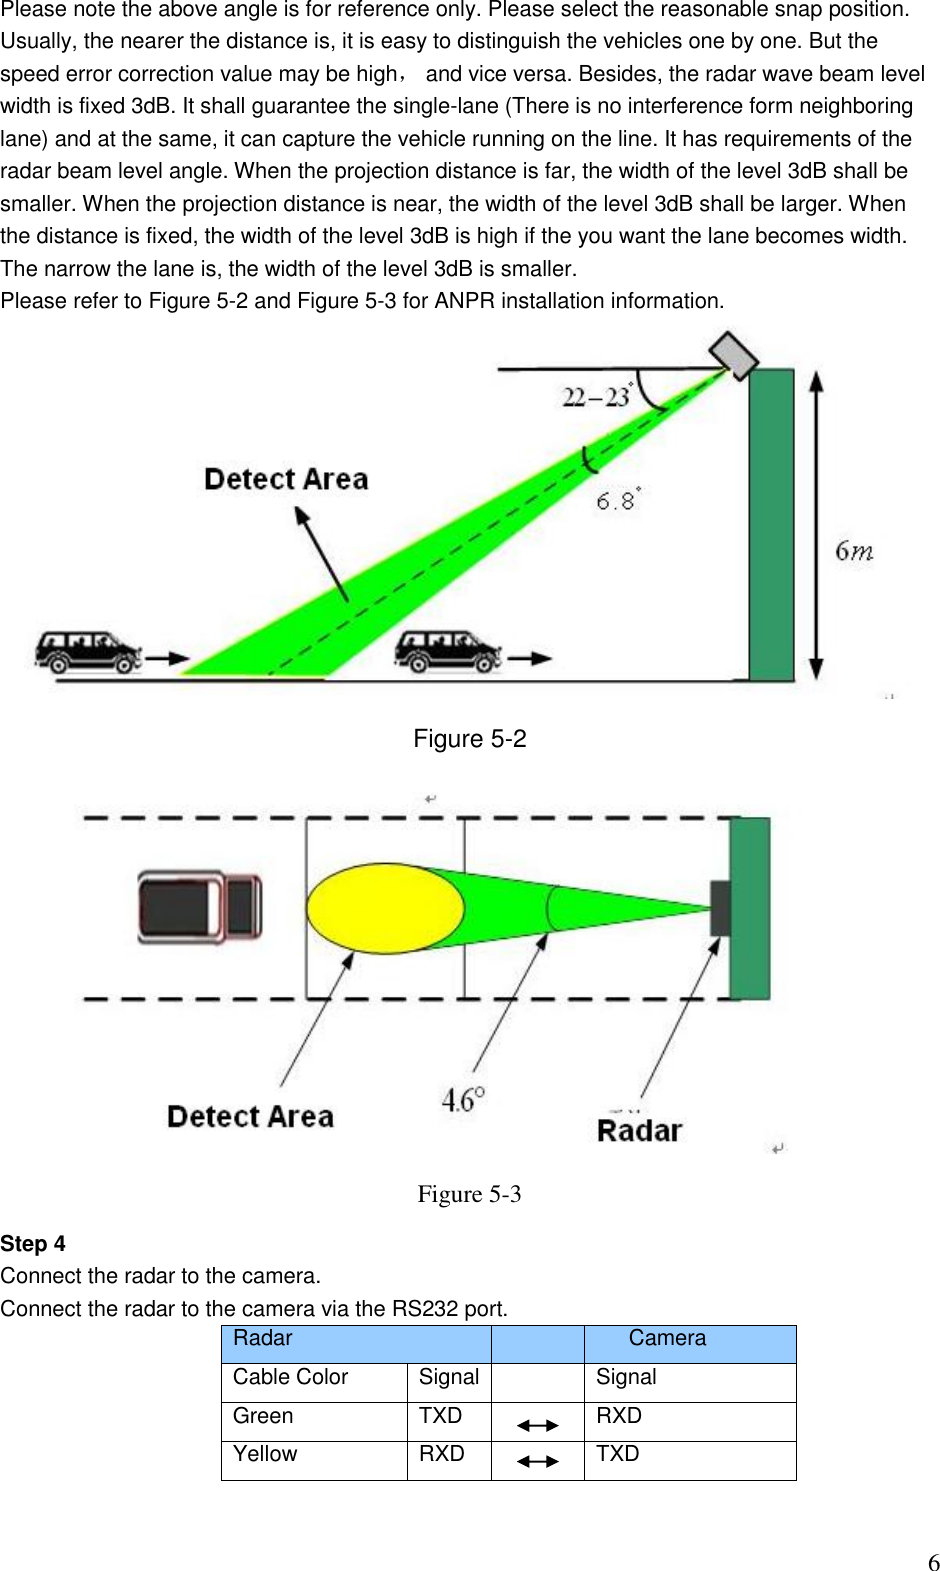                                                                              6 Please note the above angle is for reference only. Please select the reasonable snap position. Usually, the nearer the distance is, it is easy to distinguish the vehicles one by one. But the speed error correction value may be high， and vice versa. Besides, the radar wave beam level width is fixed 3dB. It shall guarantee the single-lane (There is no interference form neighboring lane) and at the same, it can capture the vehicle running on the line. It has requirements of the radar beam level angle. When the projection distance is far, the width of the level 3dB shall be smaller. When the projection distance is near, the width of the level 3dB shall be larger. When the distance is fixed, the width of the level 3dB is high if the you want the lane becomes width. The narrow the lane is, the width of the level 3dB is smaller.  Please refer to Figure 5-2 and Figure 5-3 for ANPR installation information.      Figure 5-2  Figure 5-3 Step 4 Connect the radar to the camera.  Connect the radar to the camera via the RS232 port.  Radar  Camera  Cable Color Signal   Signal  Green  TXD  RXD Yellow  RXD  TXD 